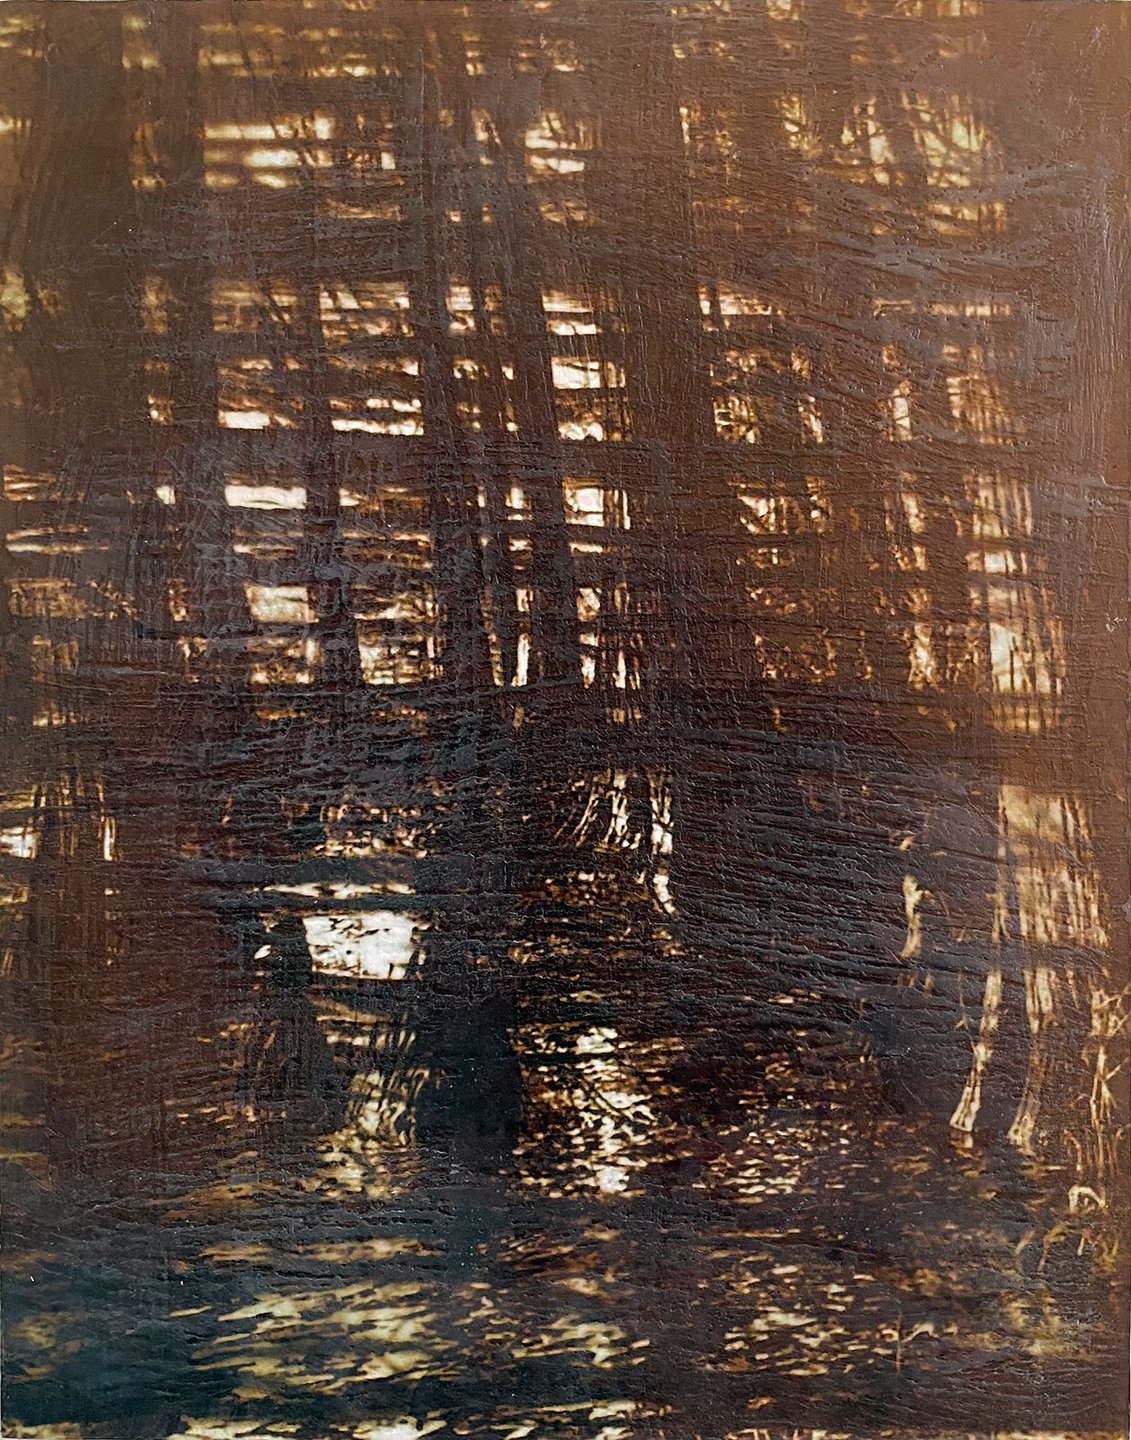  Cypress pond, encaustic, rust  and archival pigment print mounted on panel, h 11 by  w 14 inches, 2021 